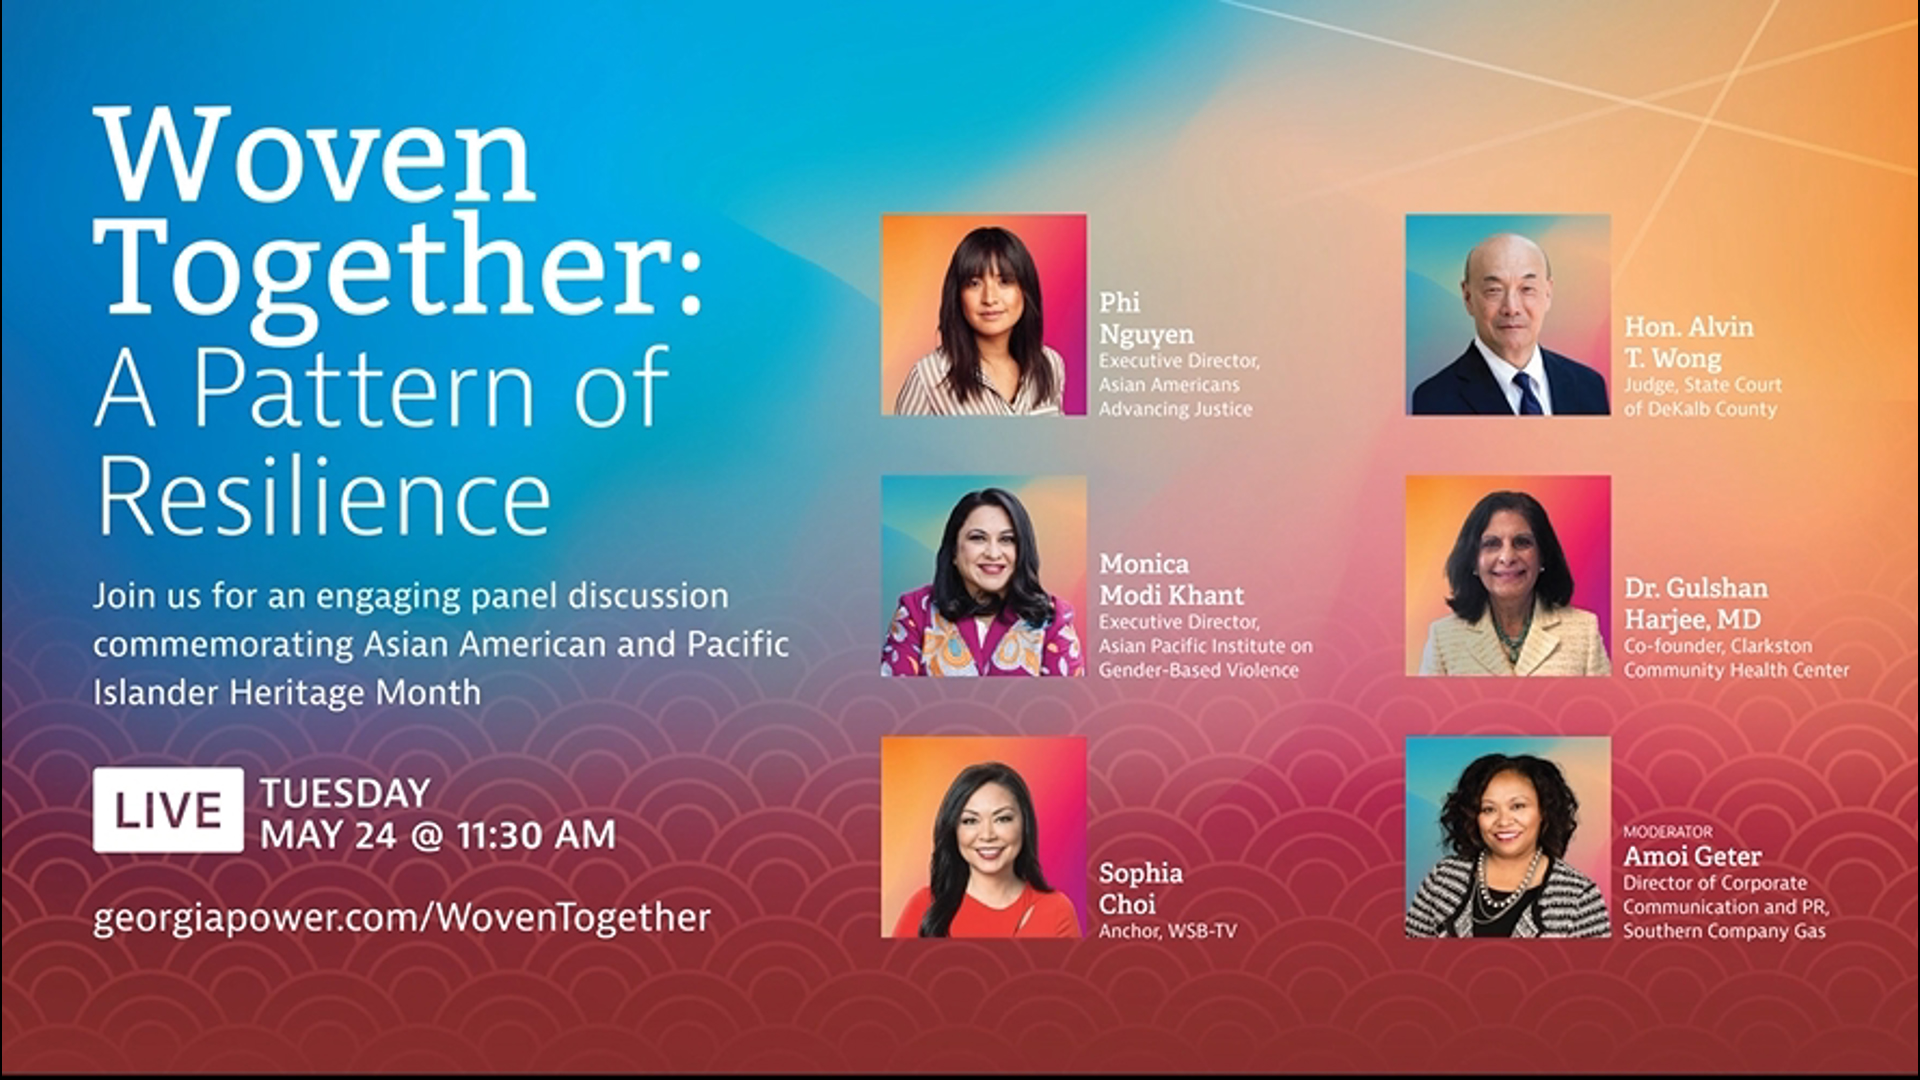 See how Georgia Power is commemorating AAPI Heritage Month with an engaging panel discussion 'Woven Together: A Pattern of Resilience'